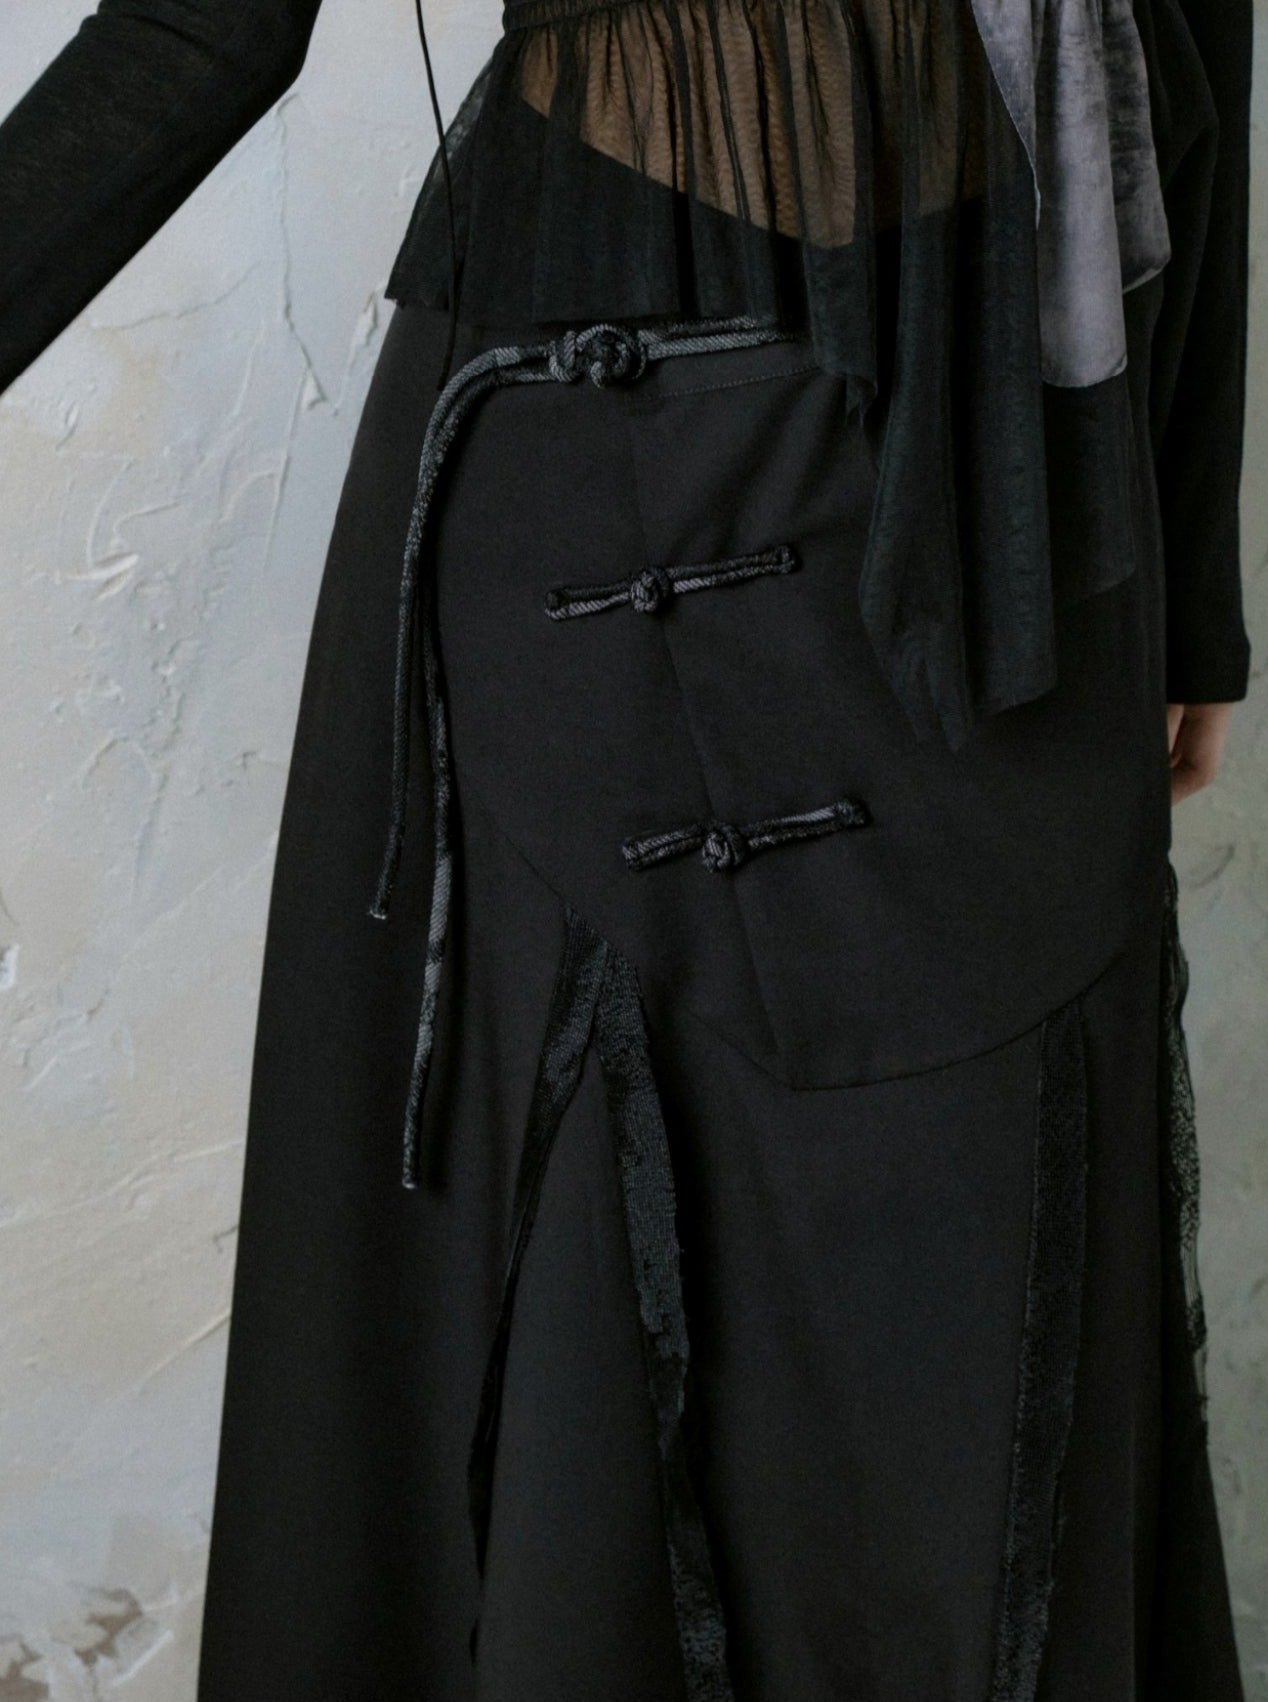 Chinese A-line long skirt